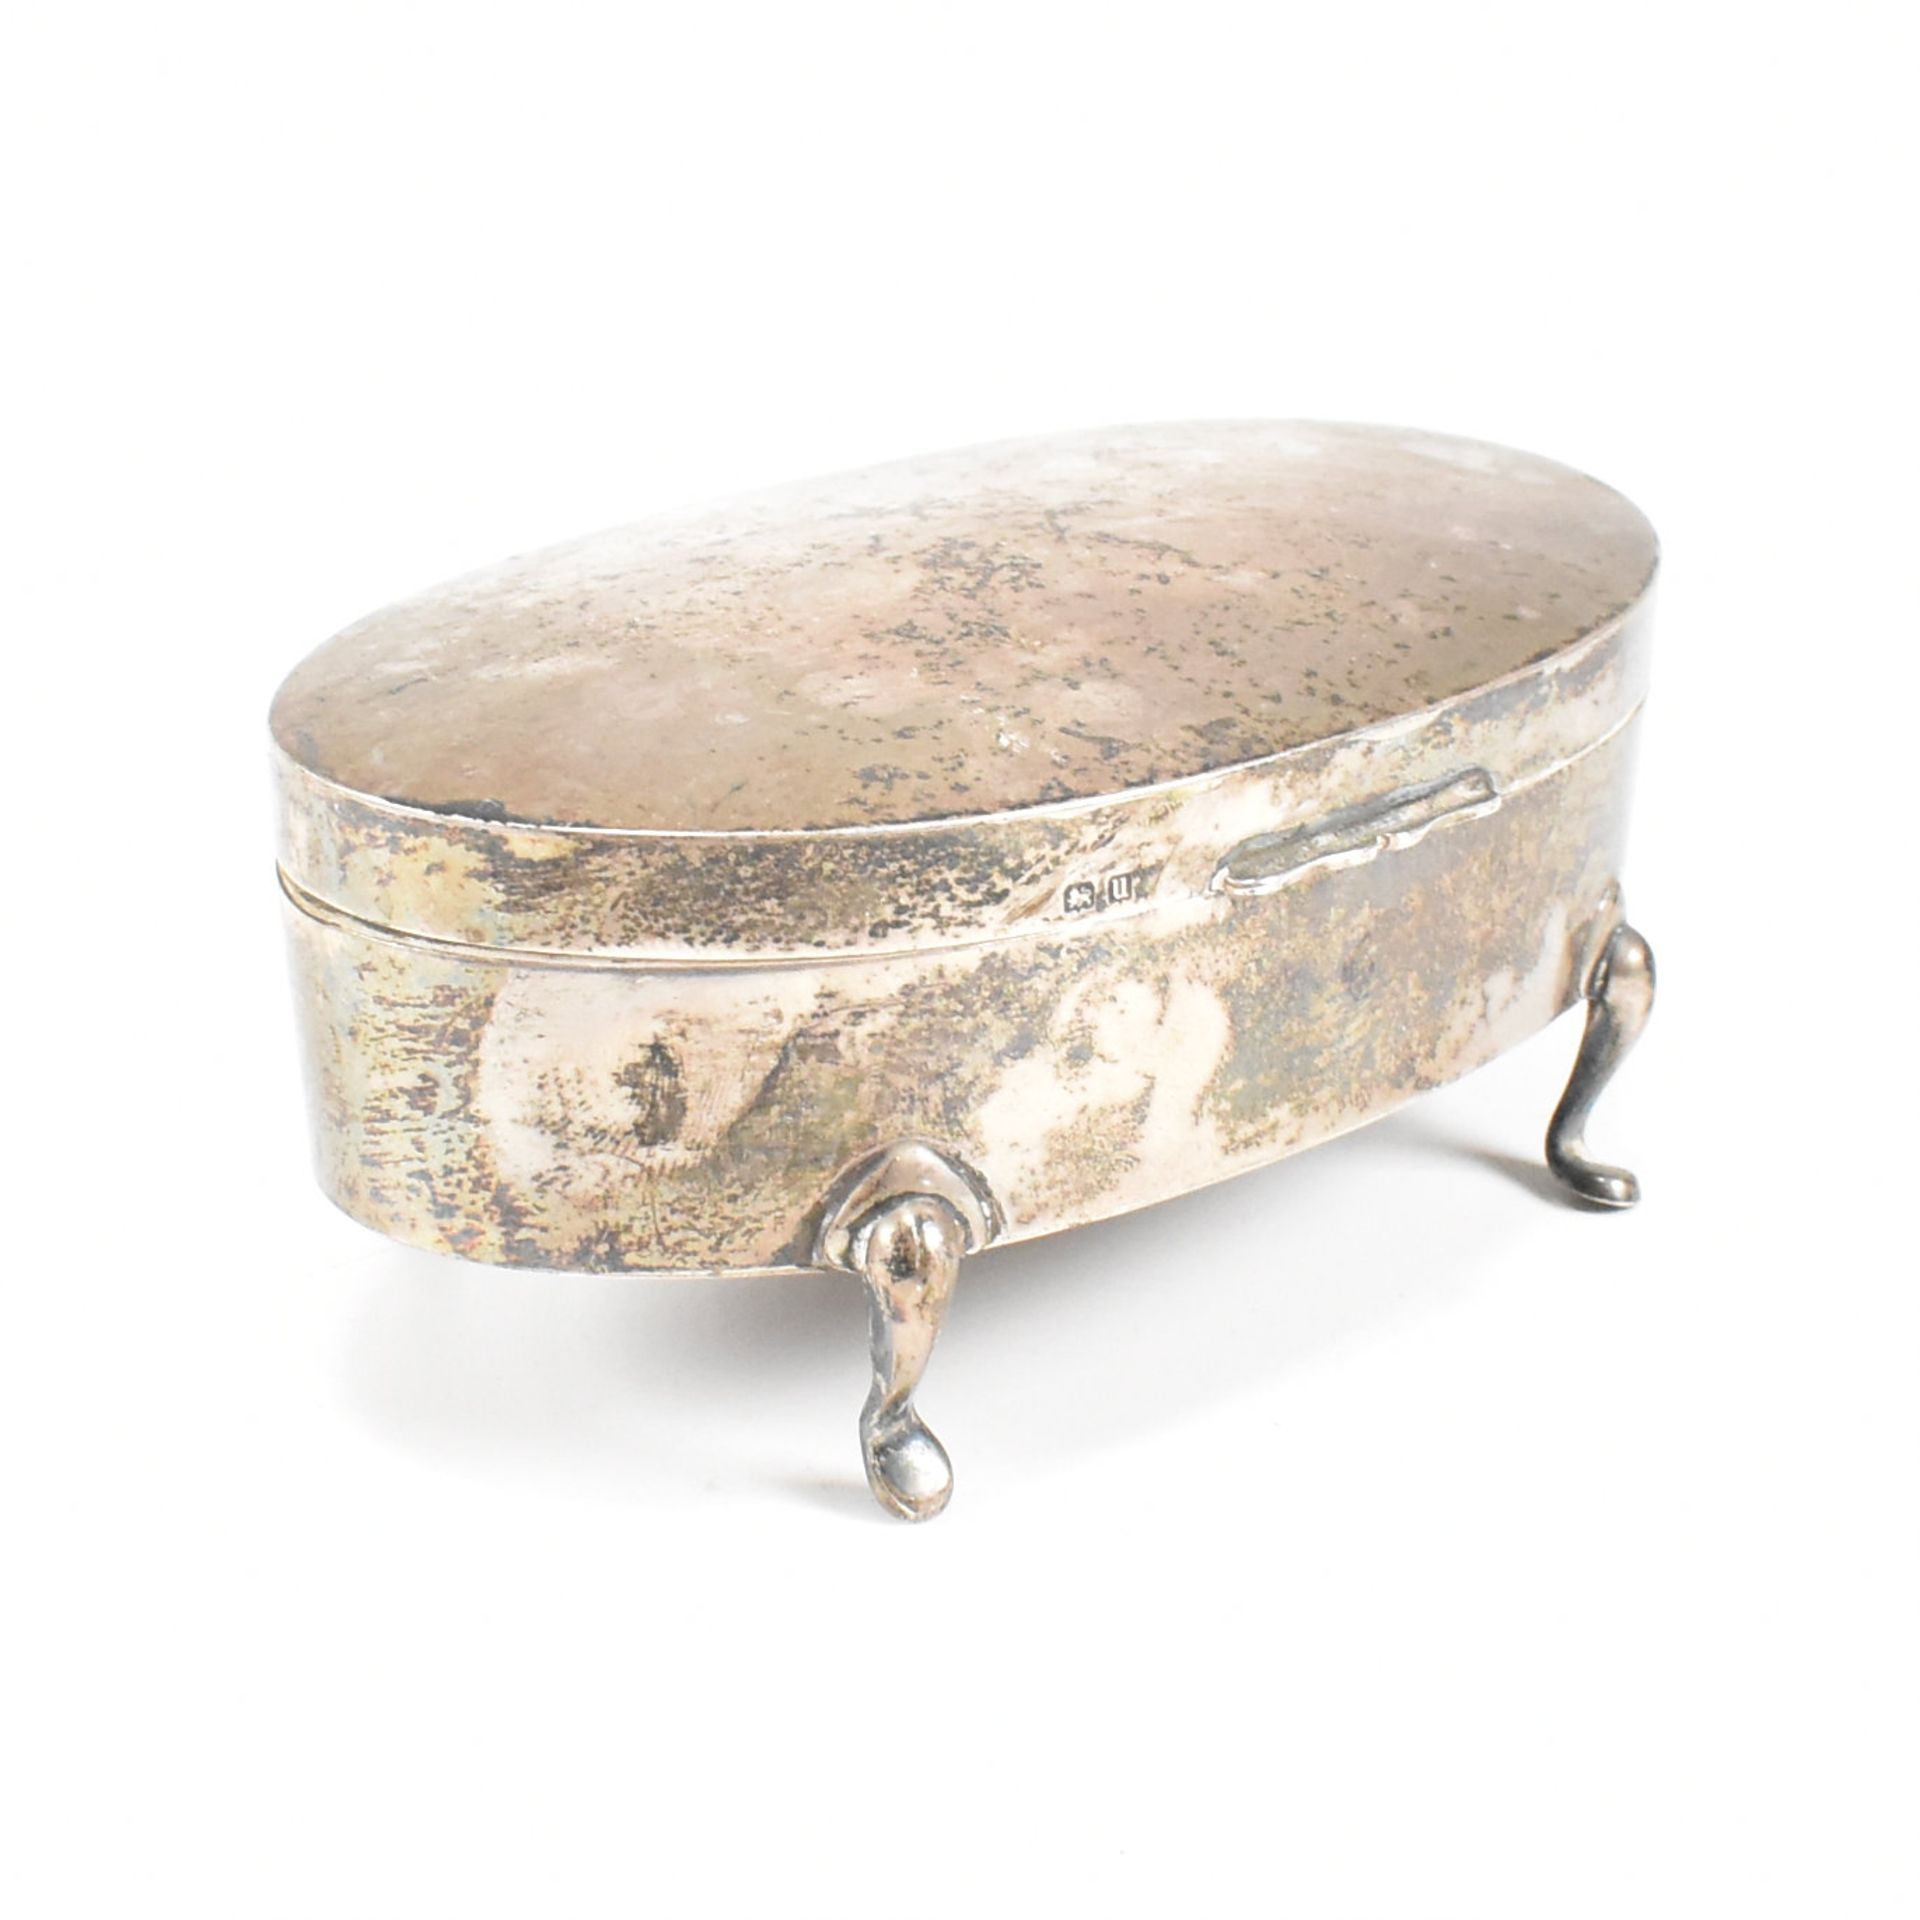 GEORGE V HALLMARKED SILVER MOUNTED JEWELLERY BOX - Image 2 of 11